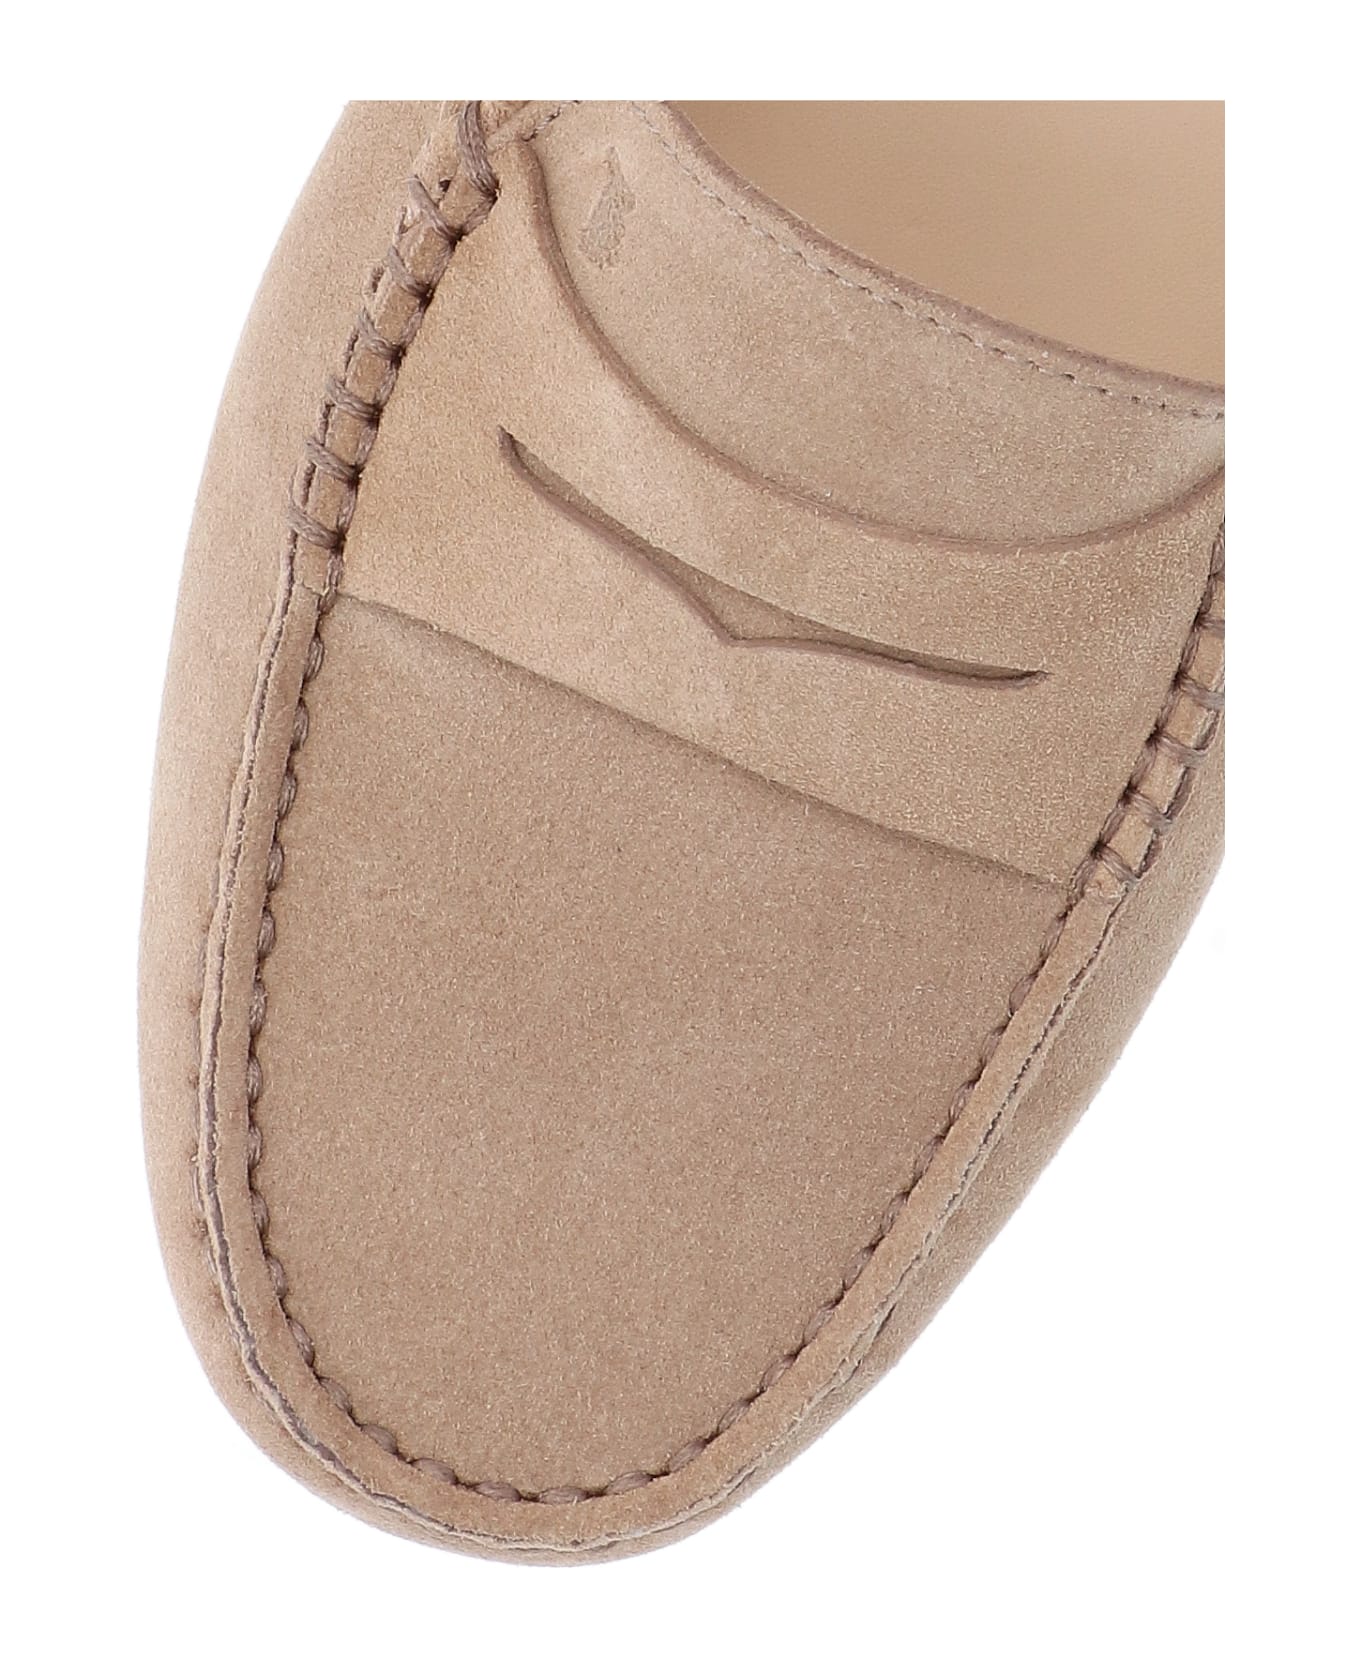 Tod's Gommino Driving Loafers - Beige フラットシューズ